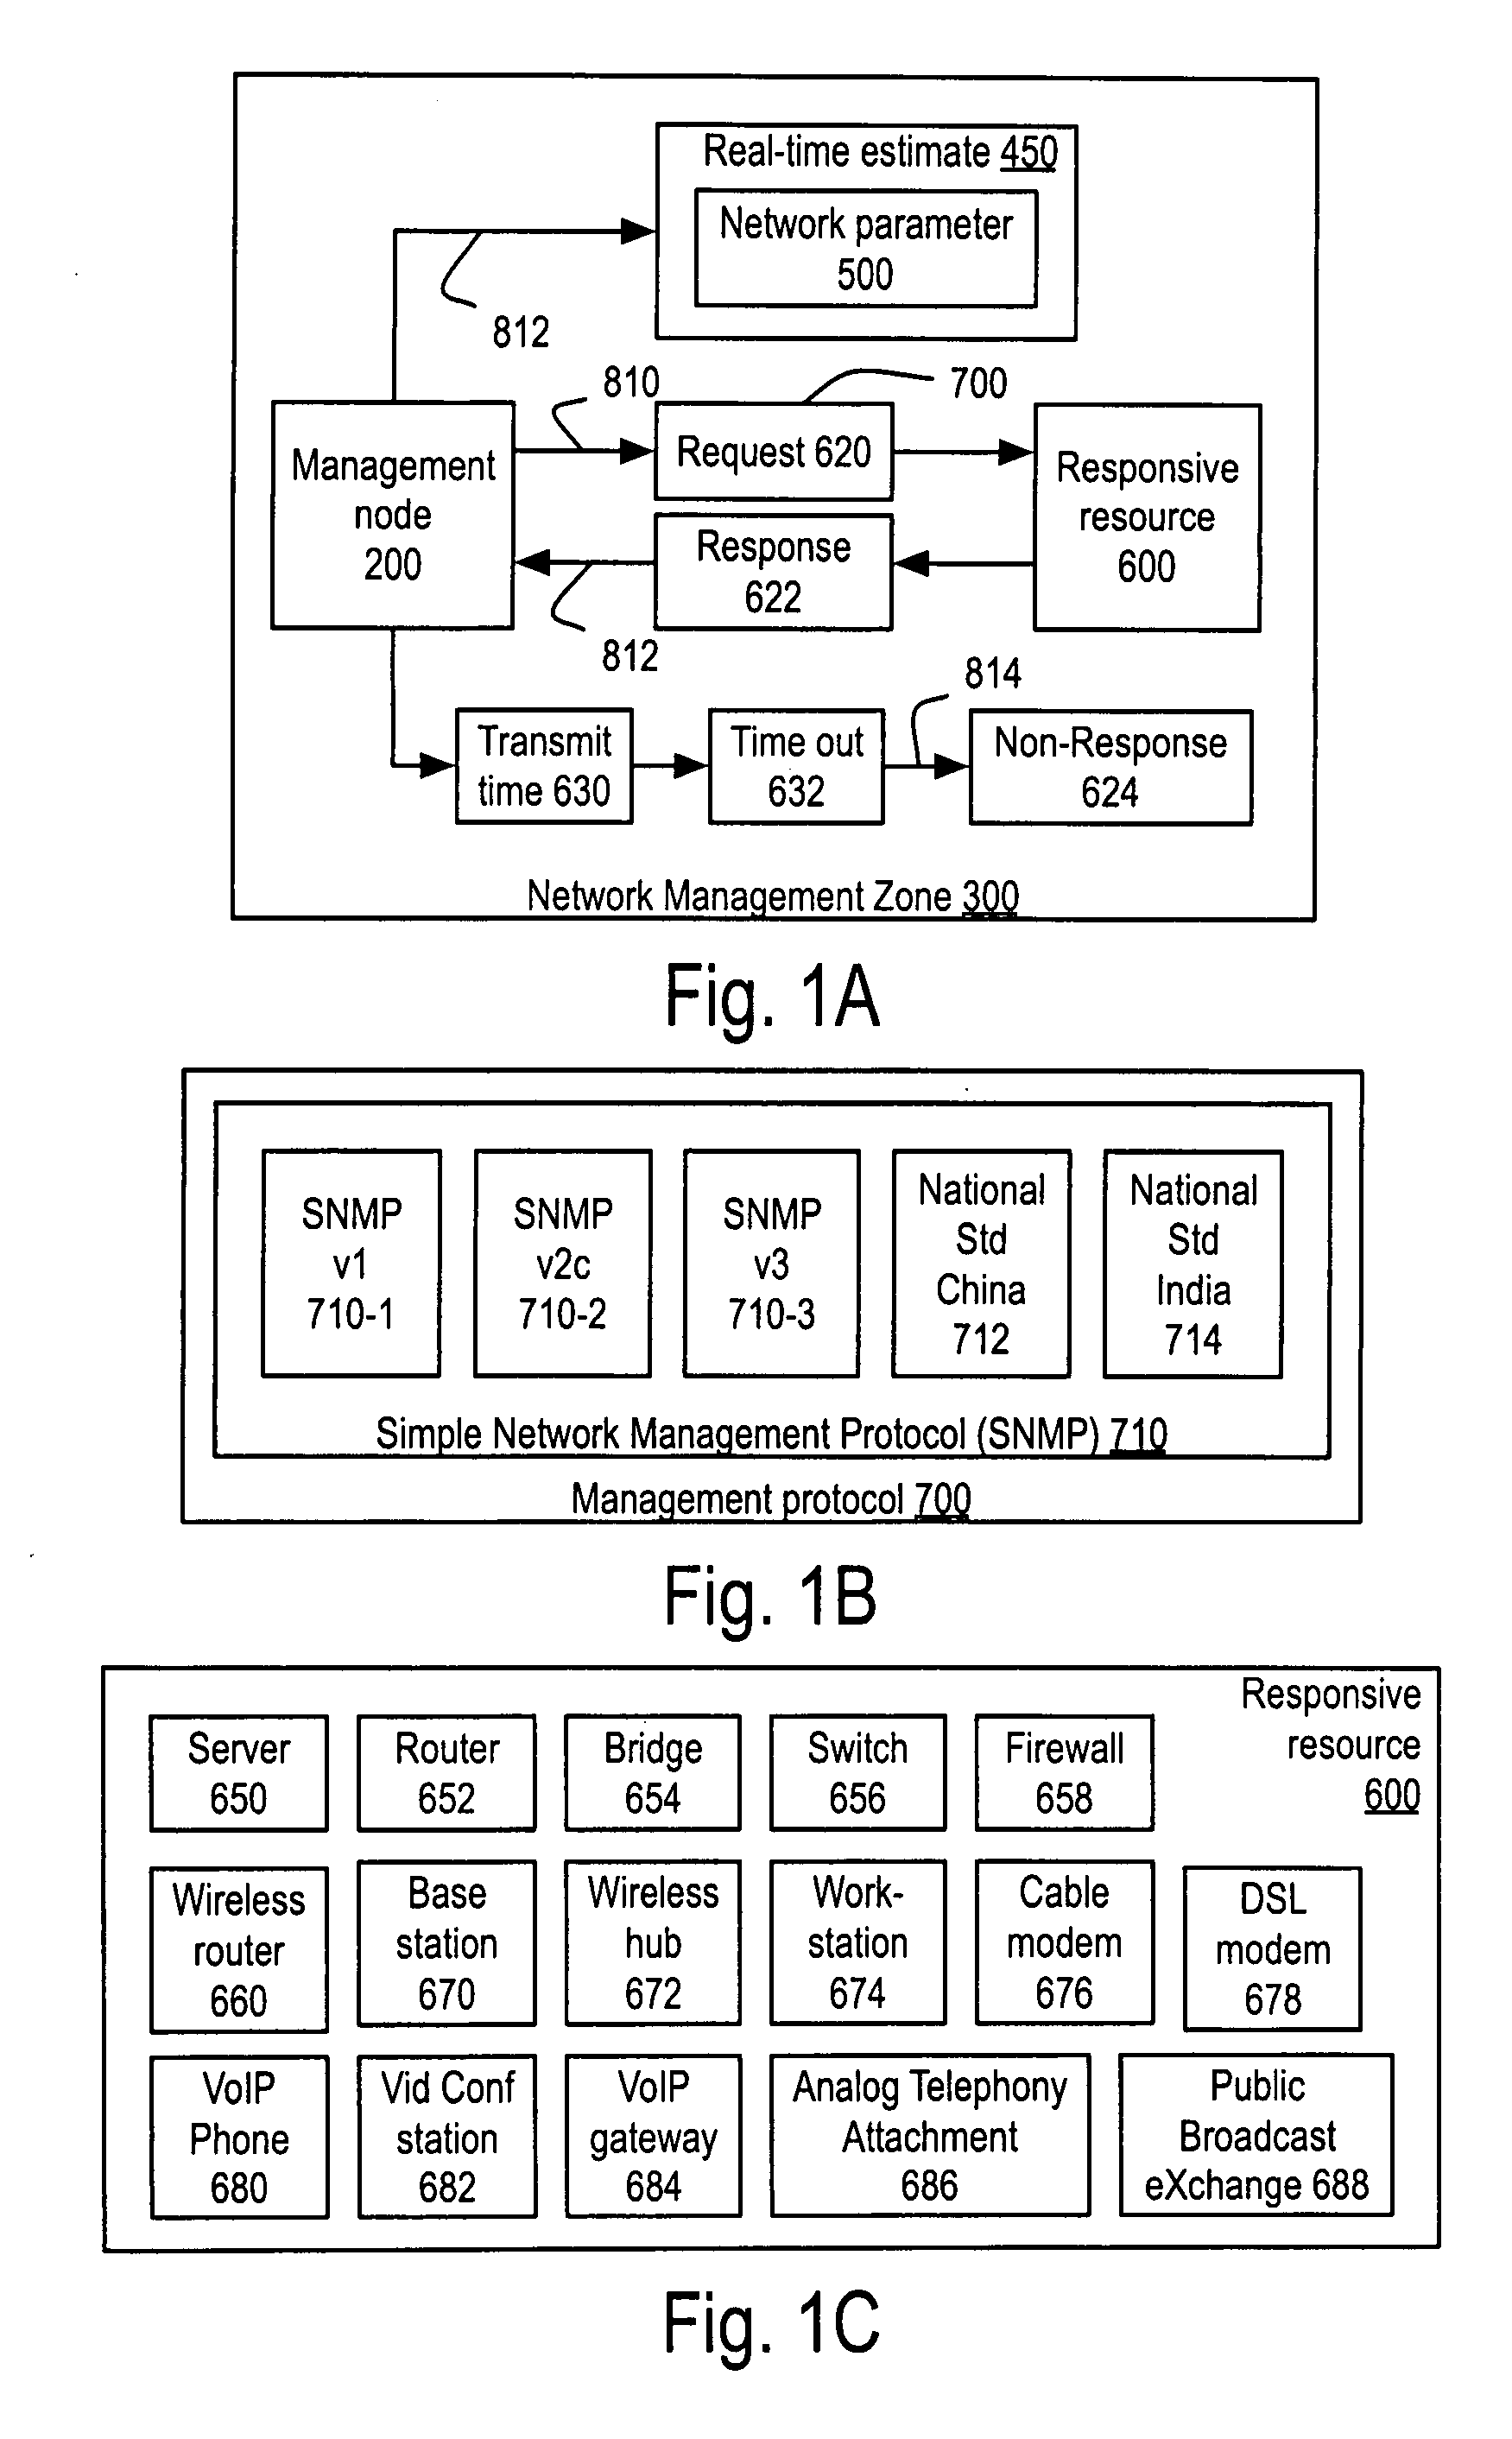 Apparatus and method for measuring and using response to SNMP requests to provide real-time network parameter estimates in a network management zone